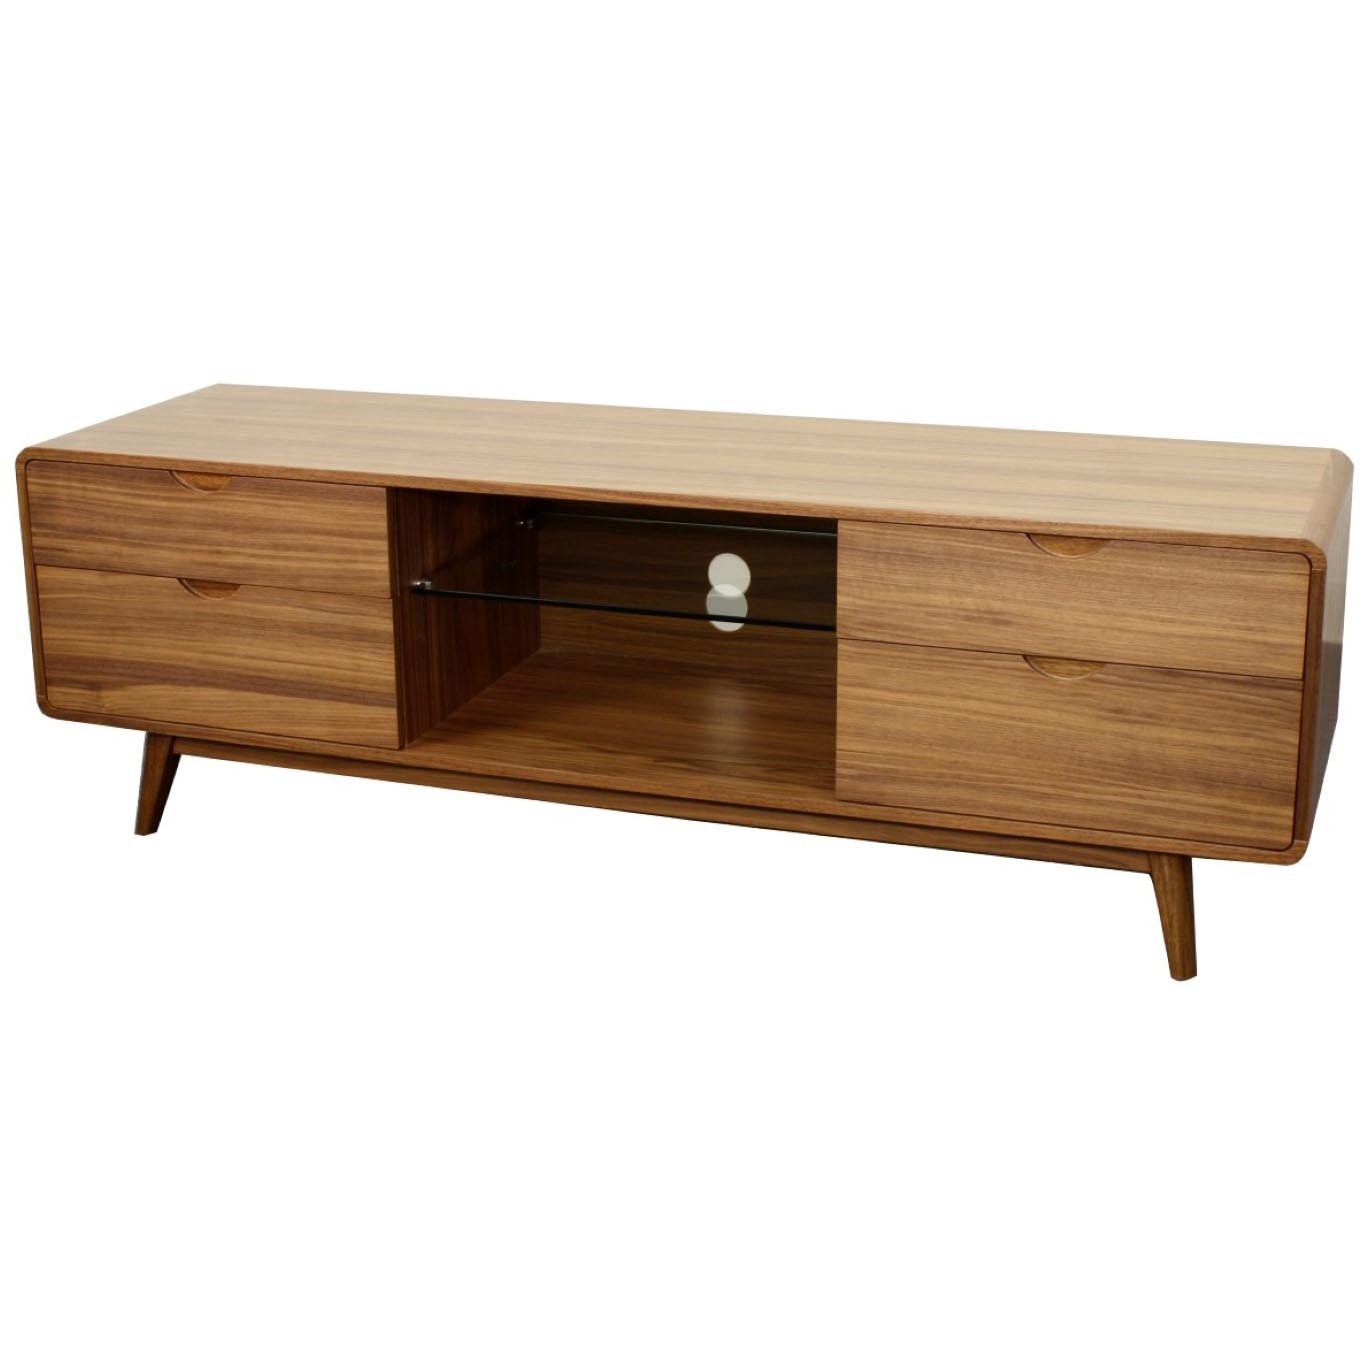 Solid wood tv stands 6